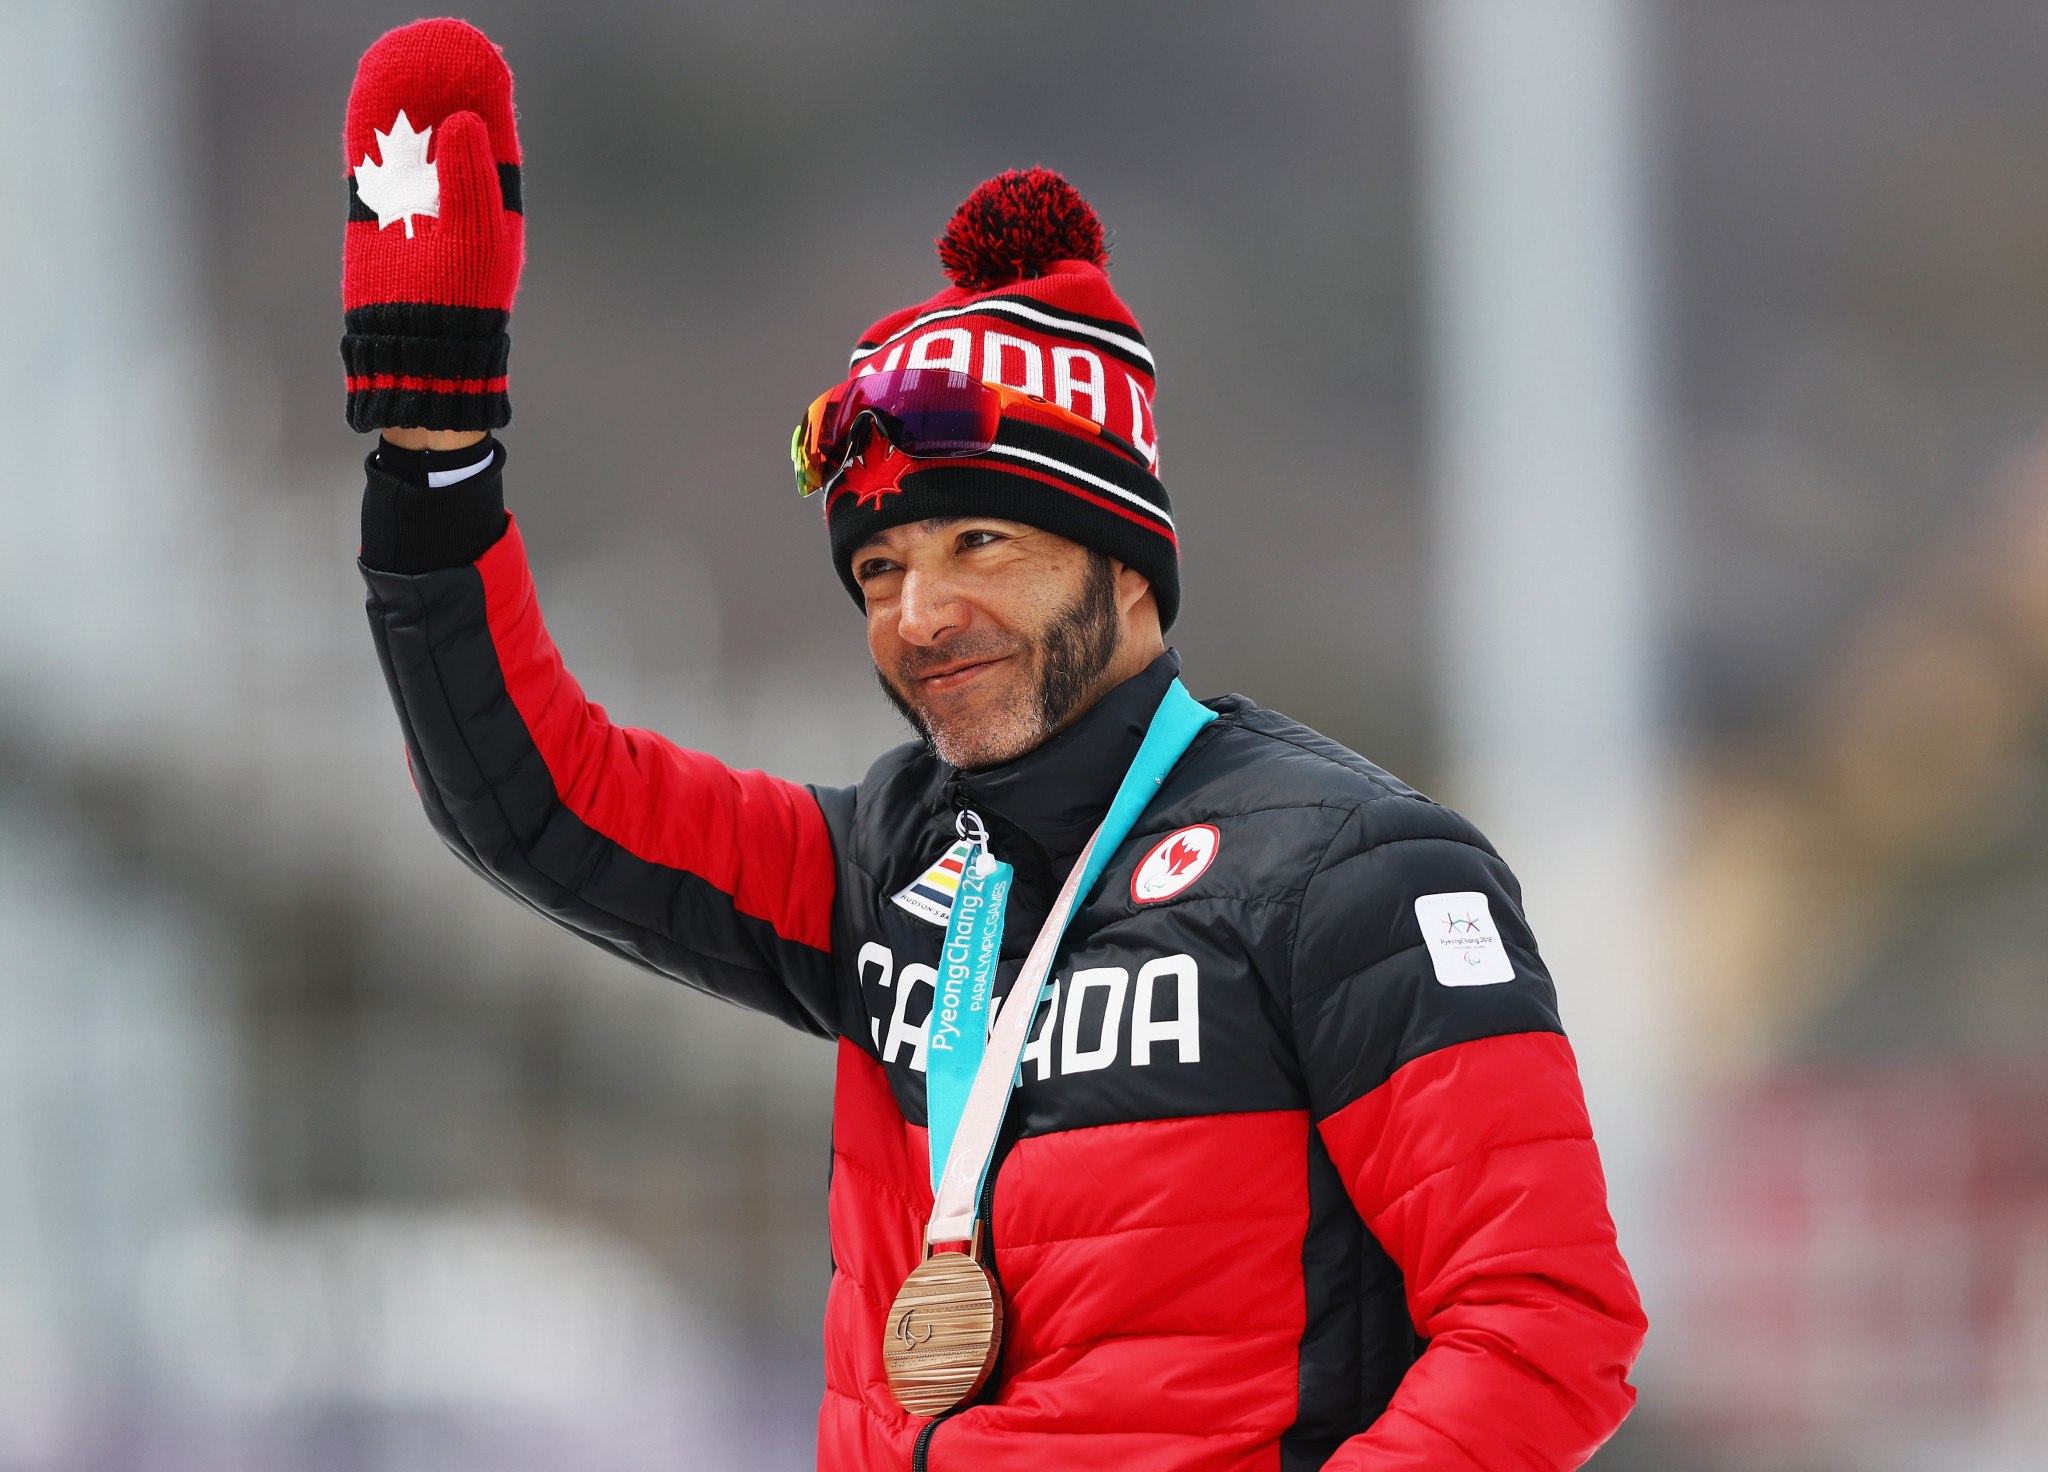 Paralympic cross-country skiing great McKeever plans to retire at Beijing 2022